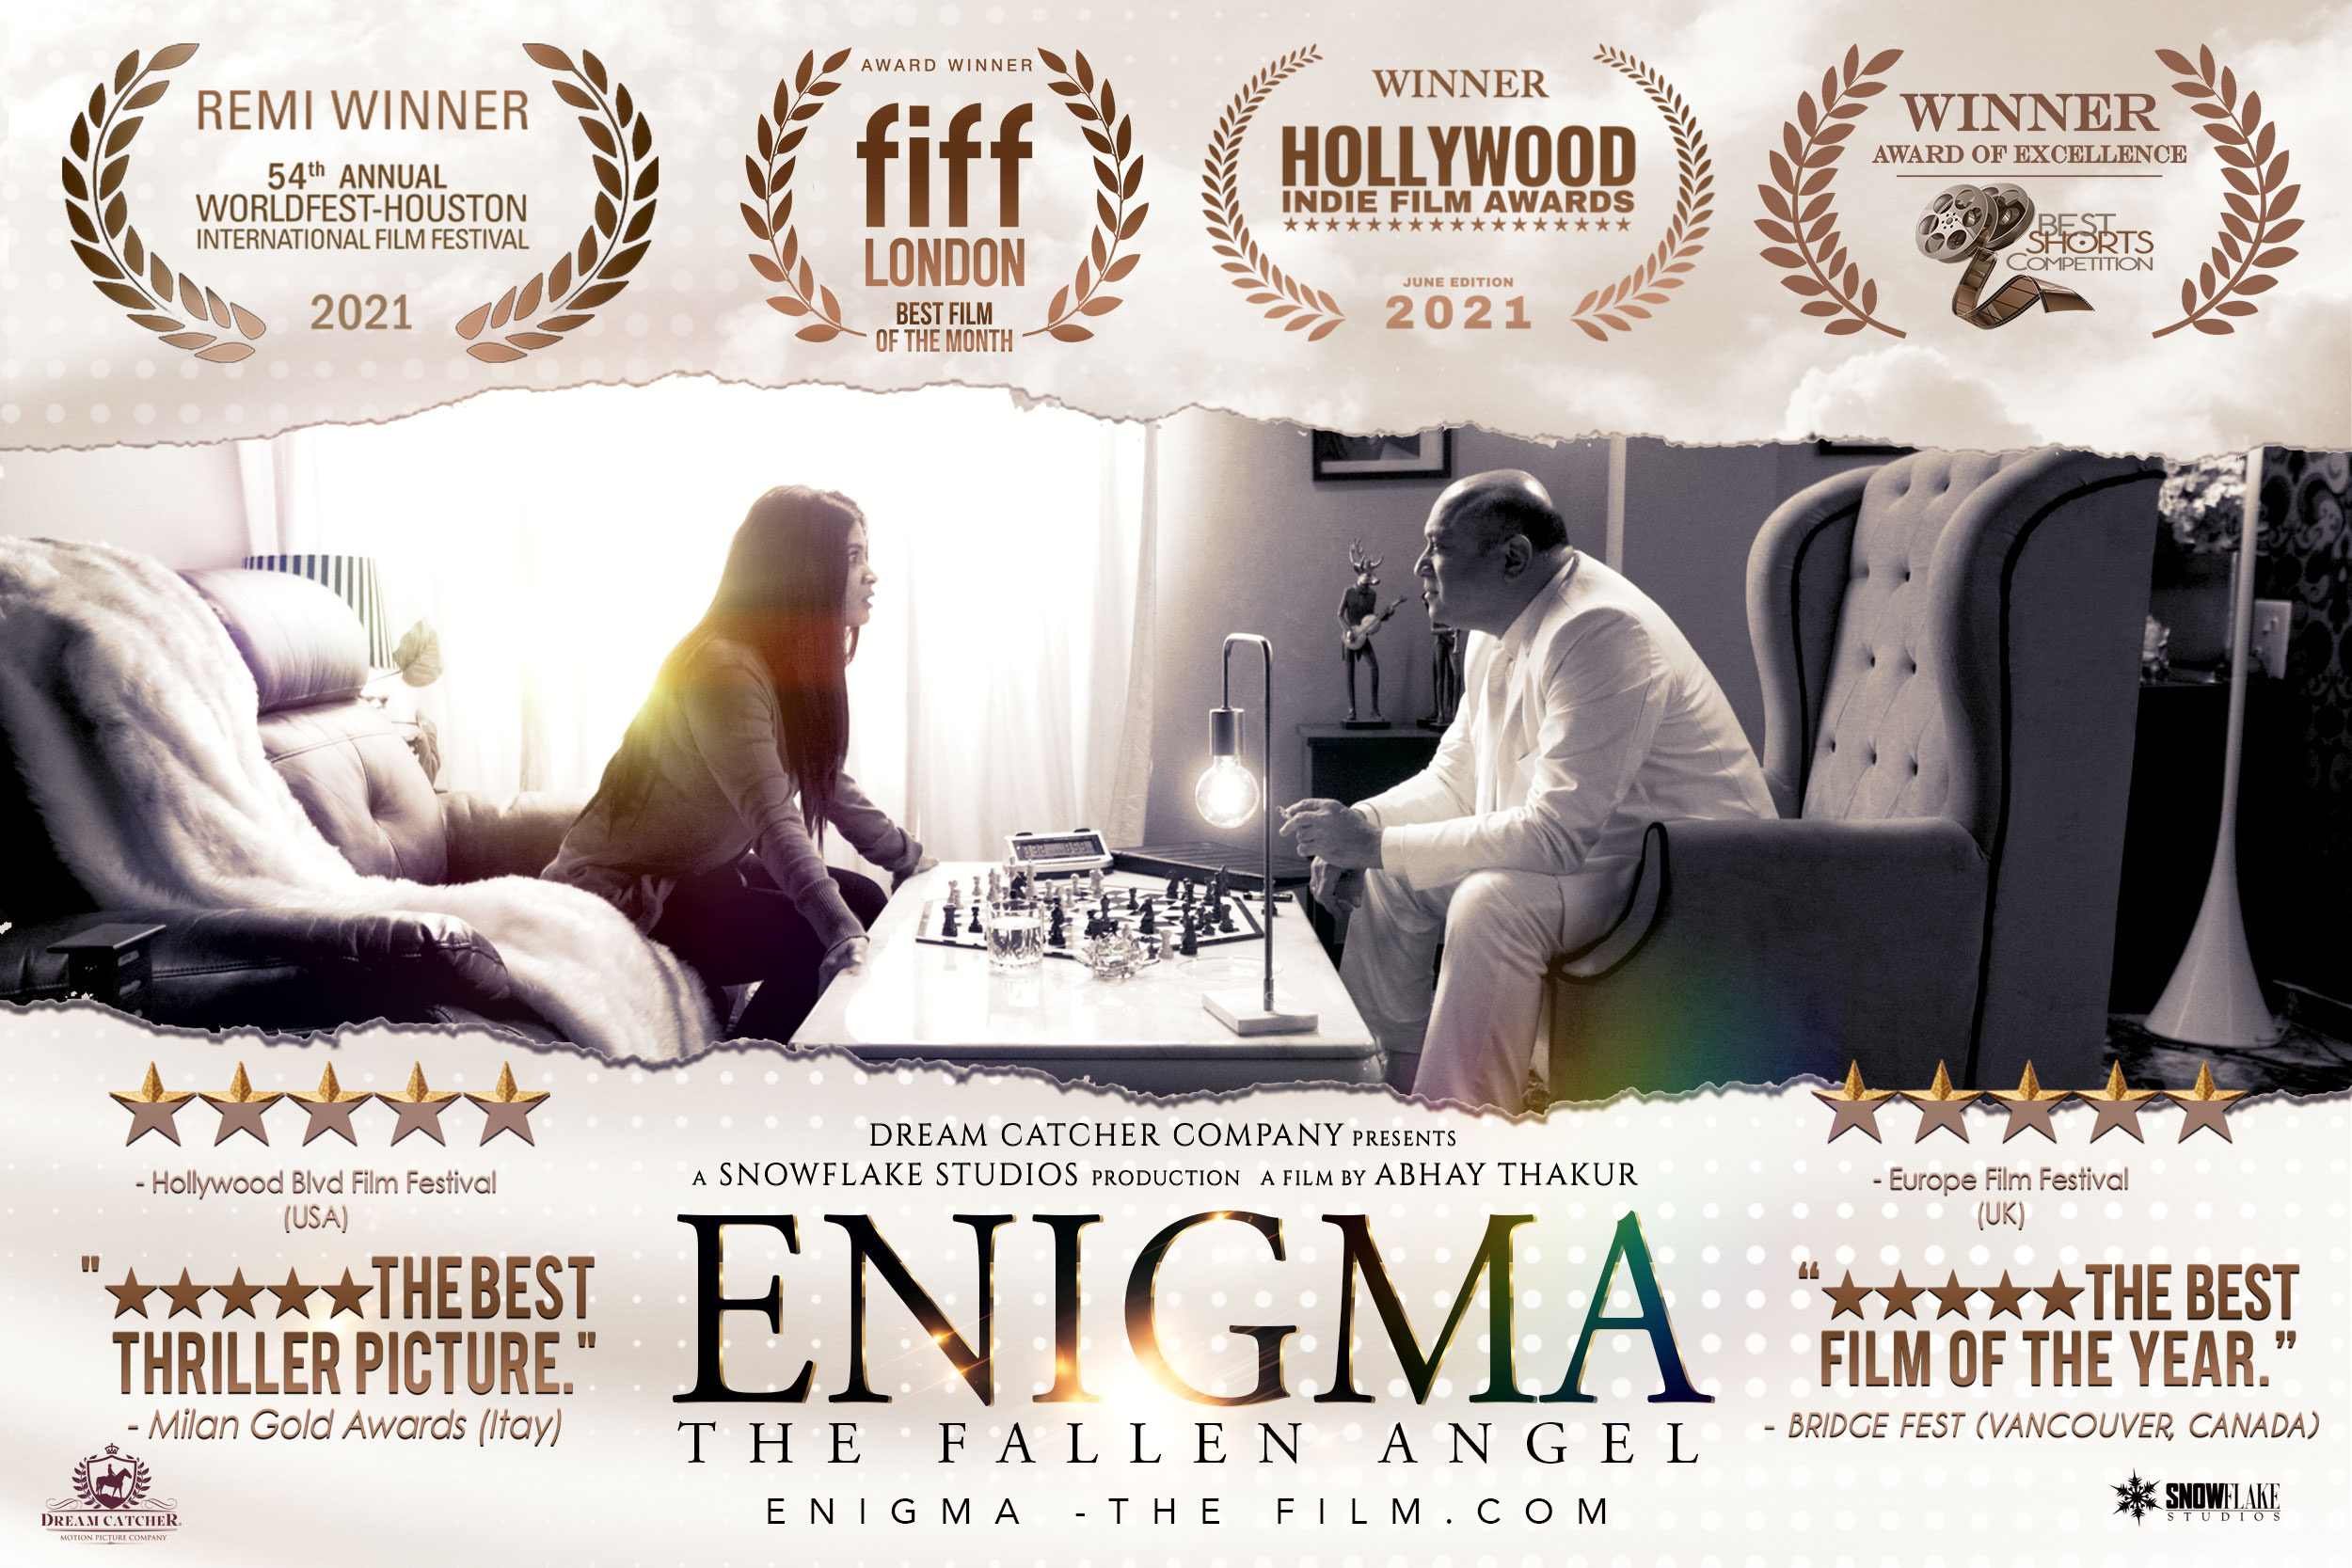 Enigma Continues Its Surge in the Film Industry, Nabbing over 150 Awards